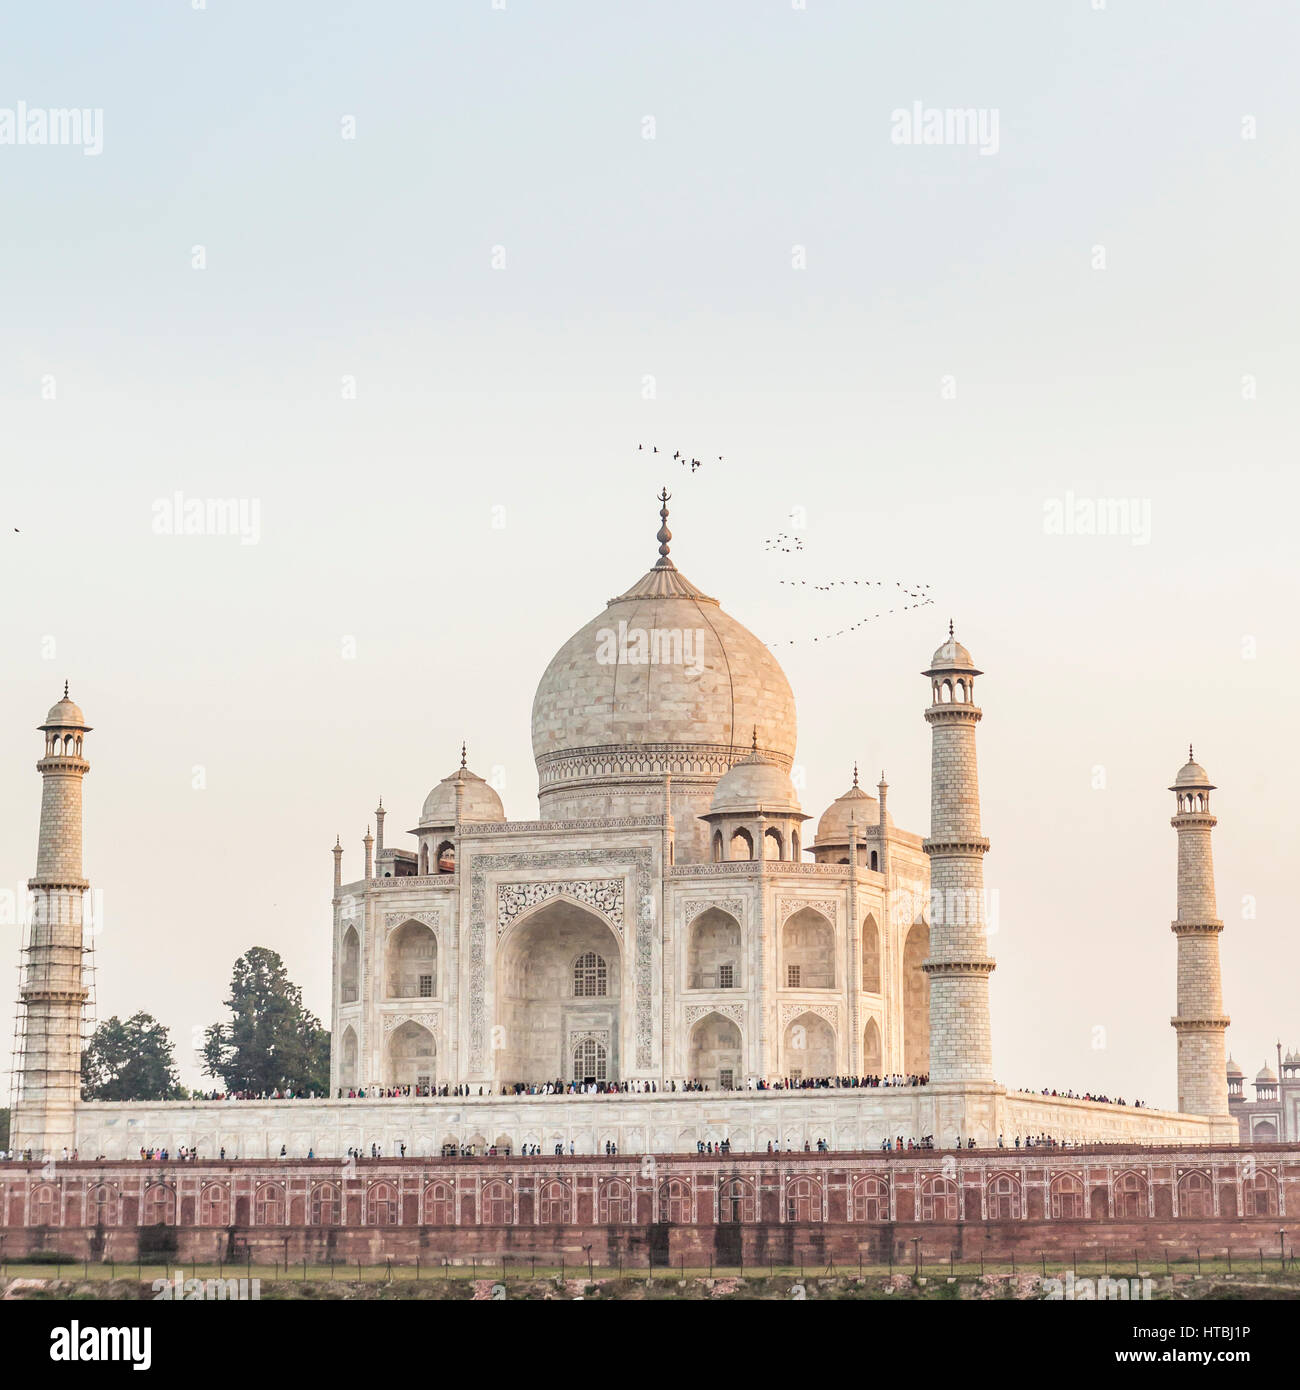 The Taj Mahal on a Friday afternoon when the site is closed to the public but open for worshipers, Agra, India. Stock Photo